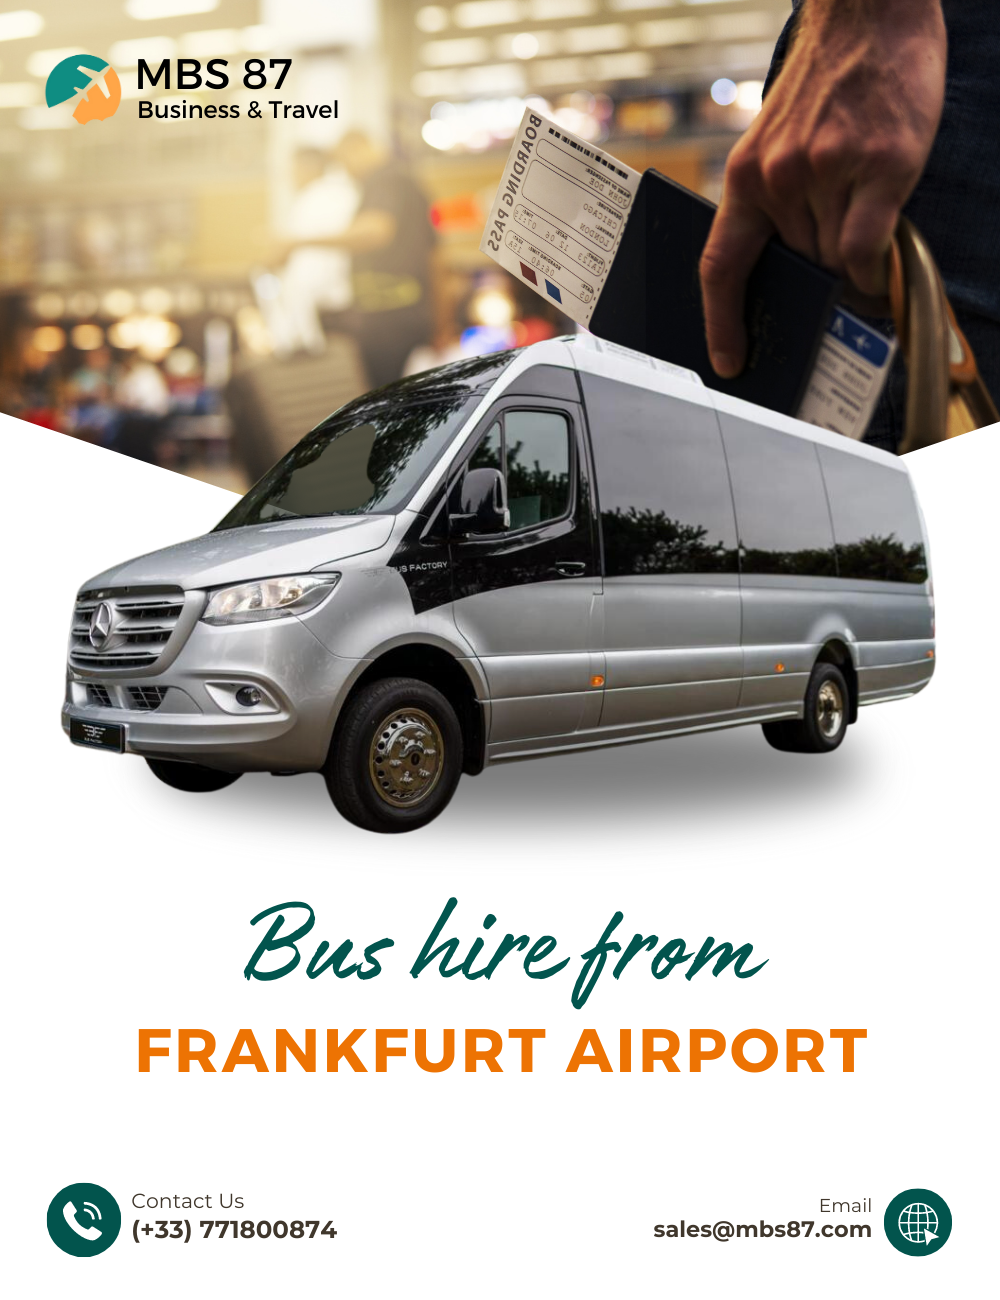 Bus Service Frankfurt Airport - How to find?